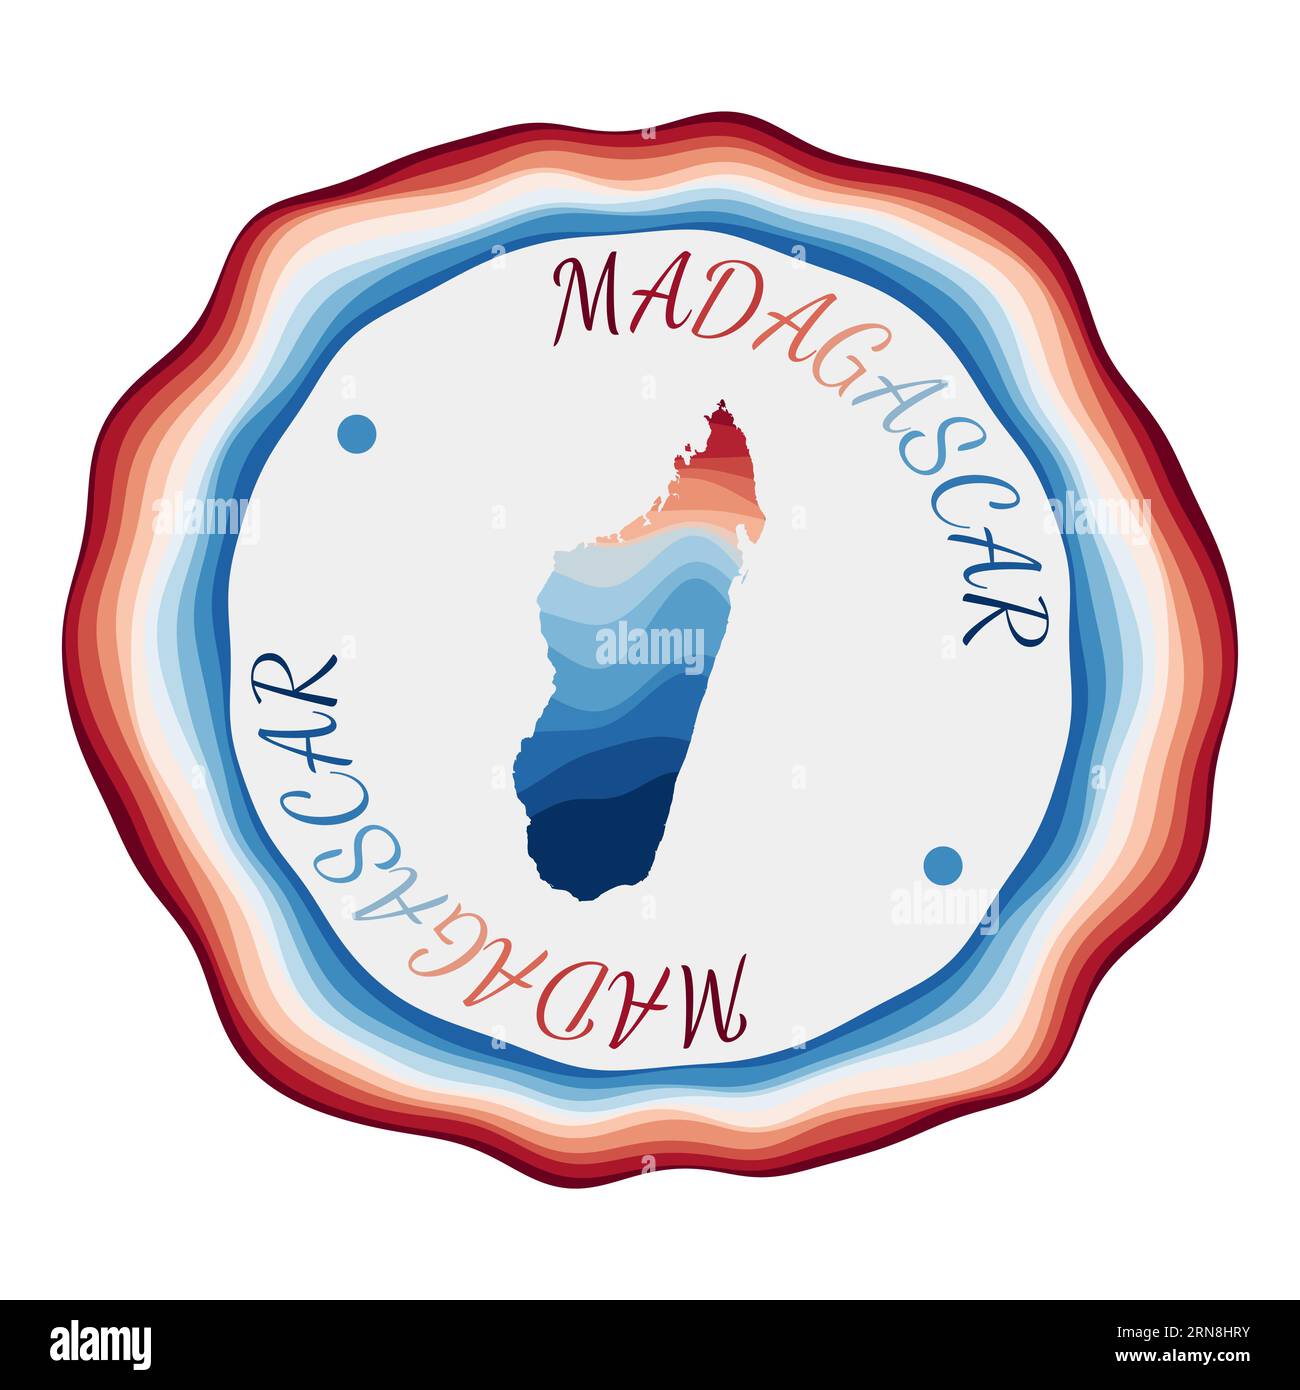 Madagascar badge. Map of the country with beautiful geometric waves and vibrant red blue frame. Vivid round Madagascar logo. Vector illustration. Stock Vector